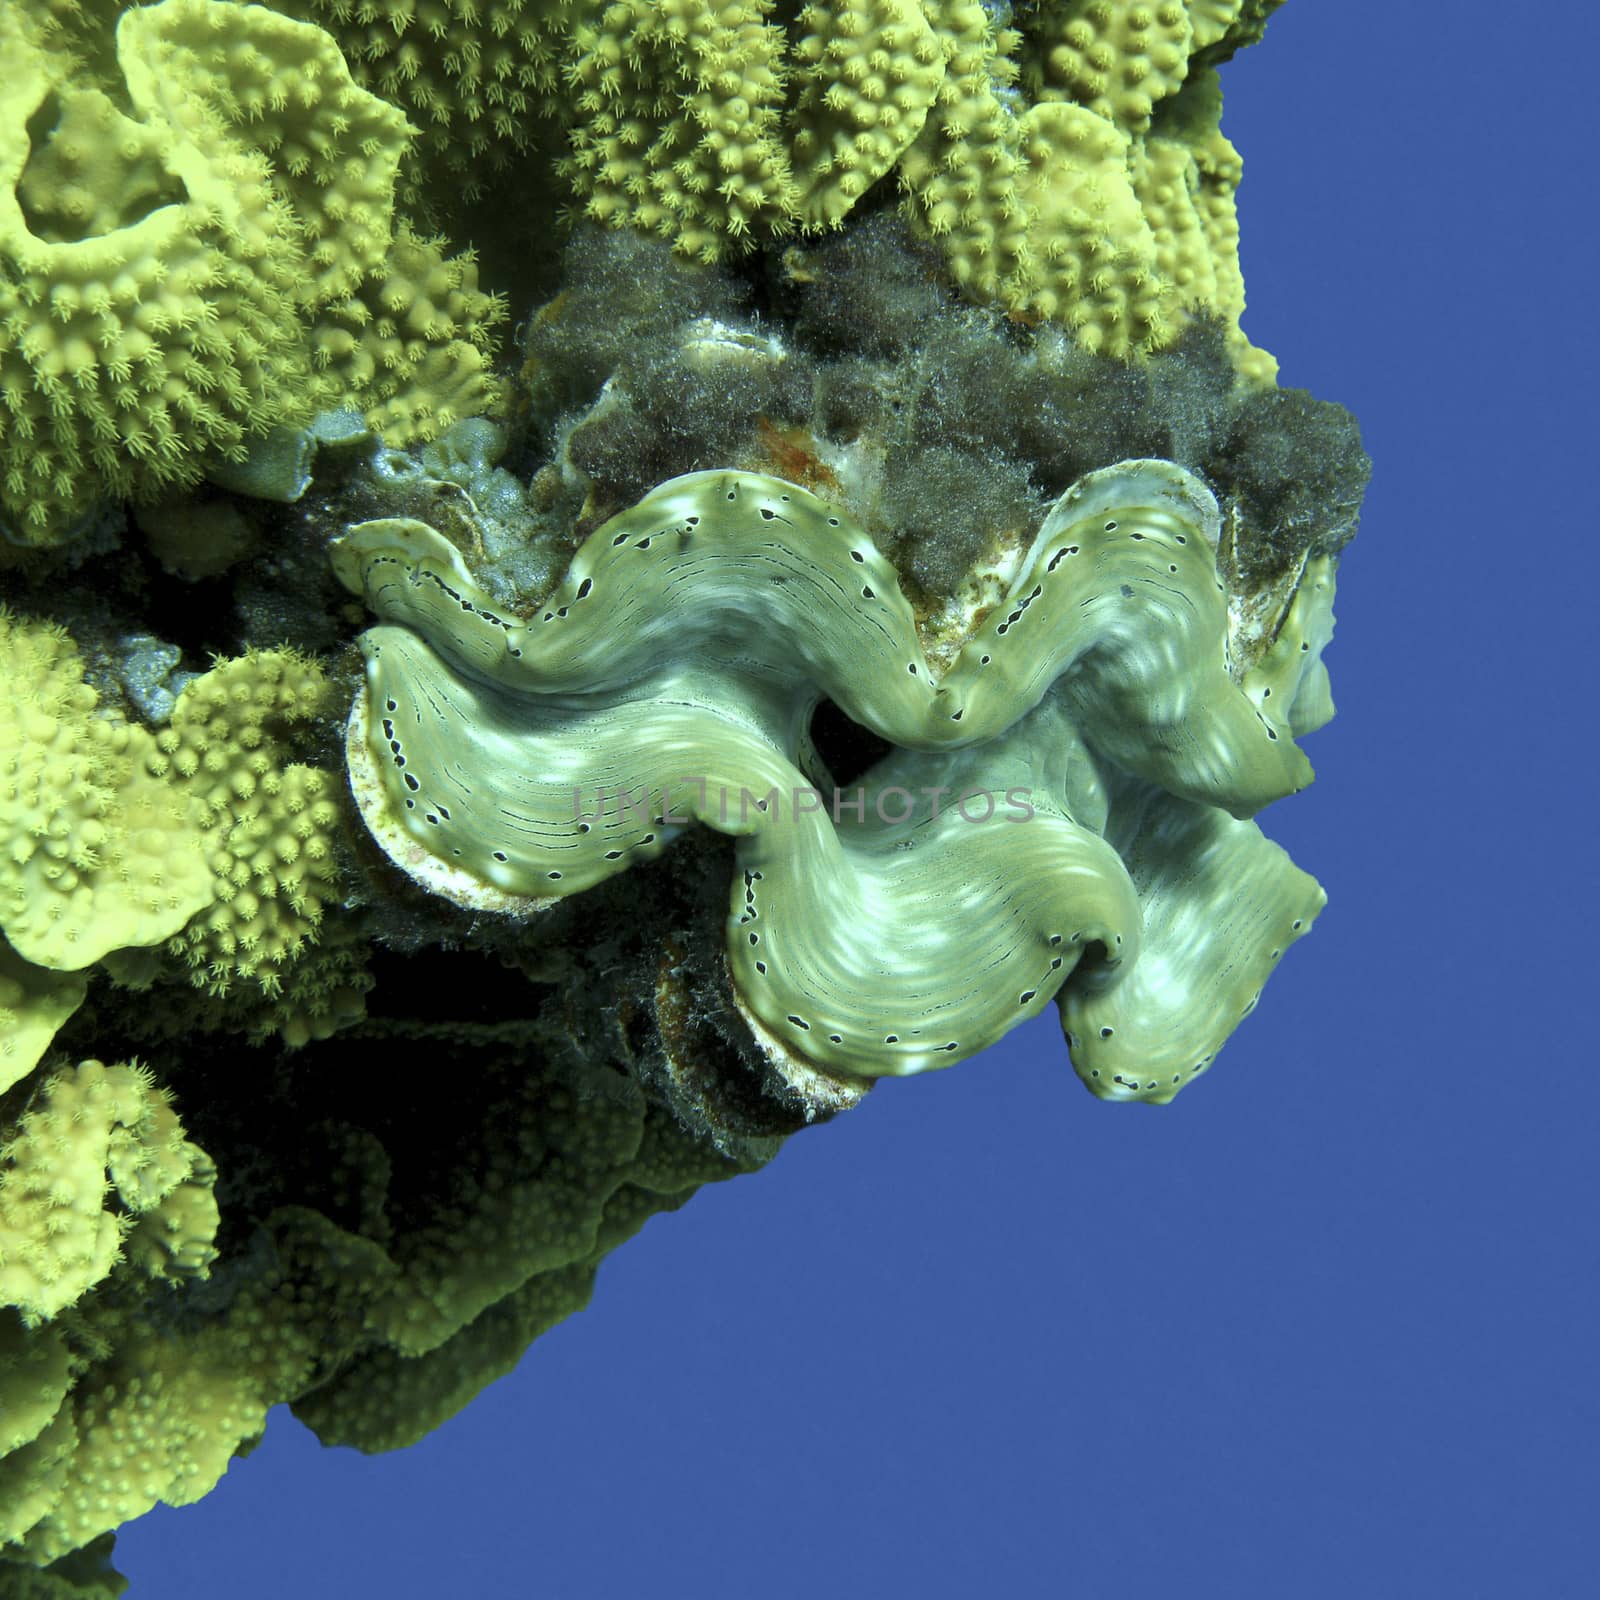 coral reef with Tridacna gigas on a background of blue water, underwater.